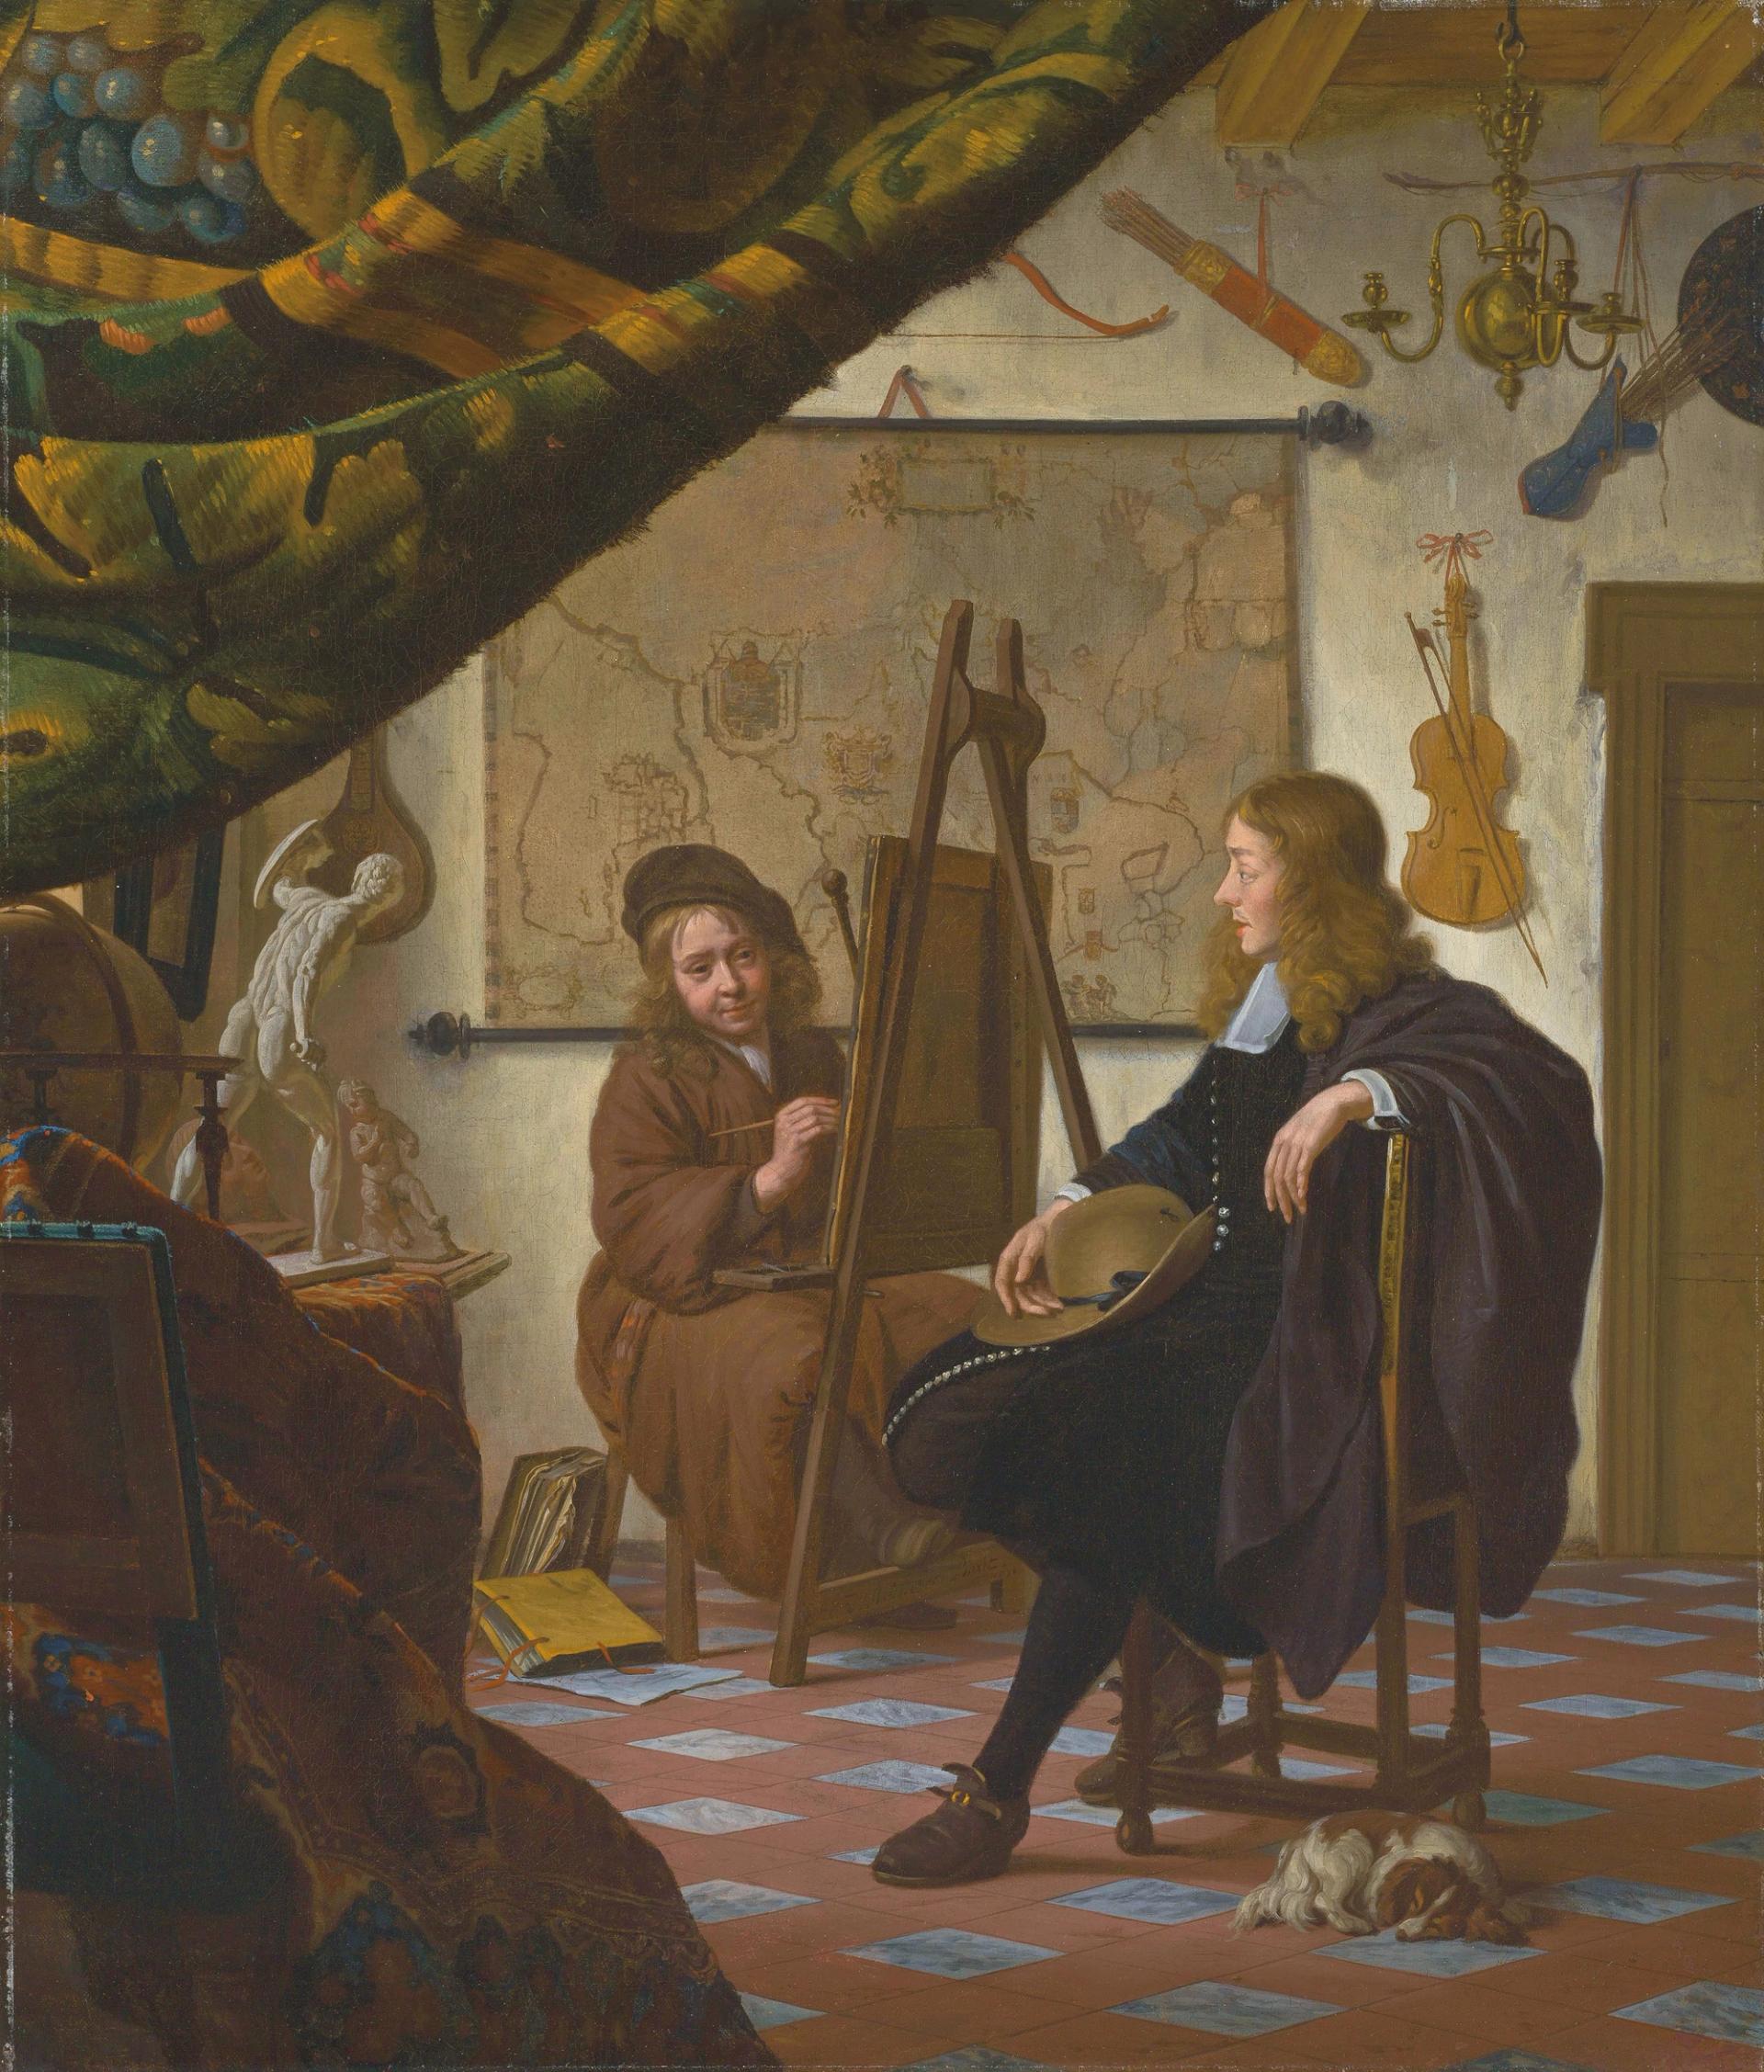 Michiel van Musscher’s A Self-portrait of the Artist in his Studio (1670) is thought to have been inspired by a lost Vermeer work Courtesy of Christie’s